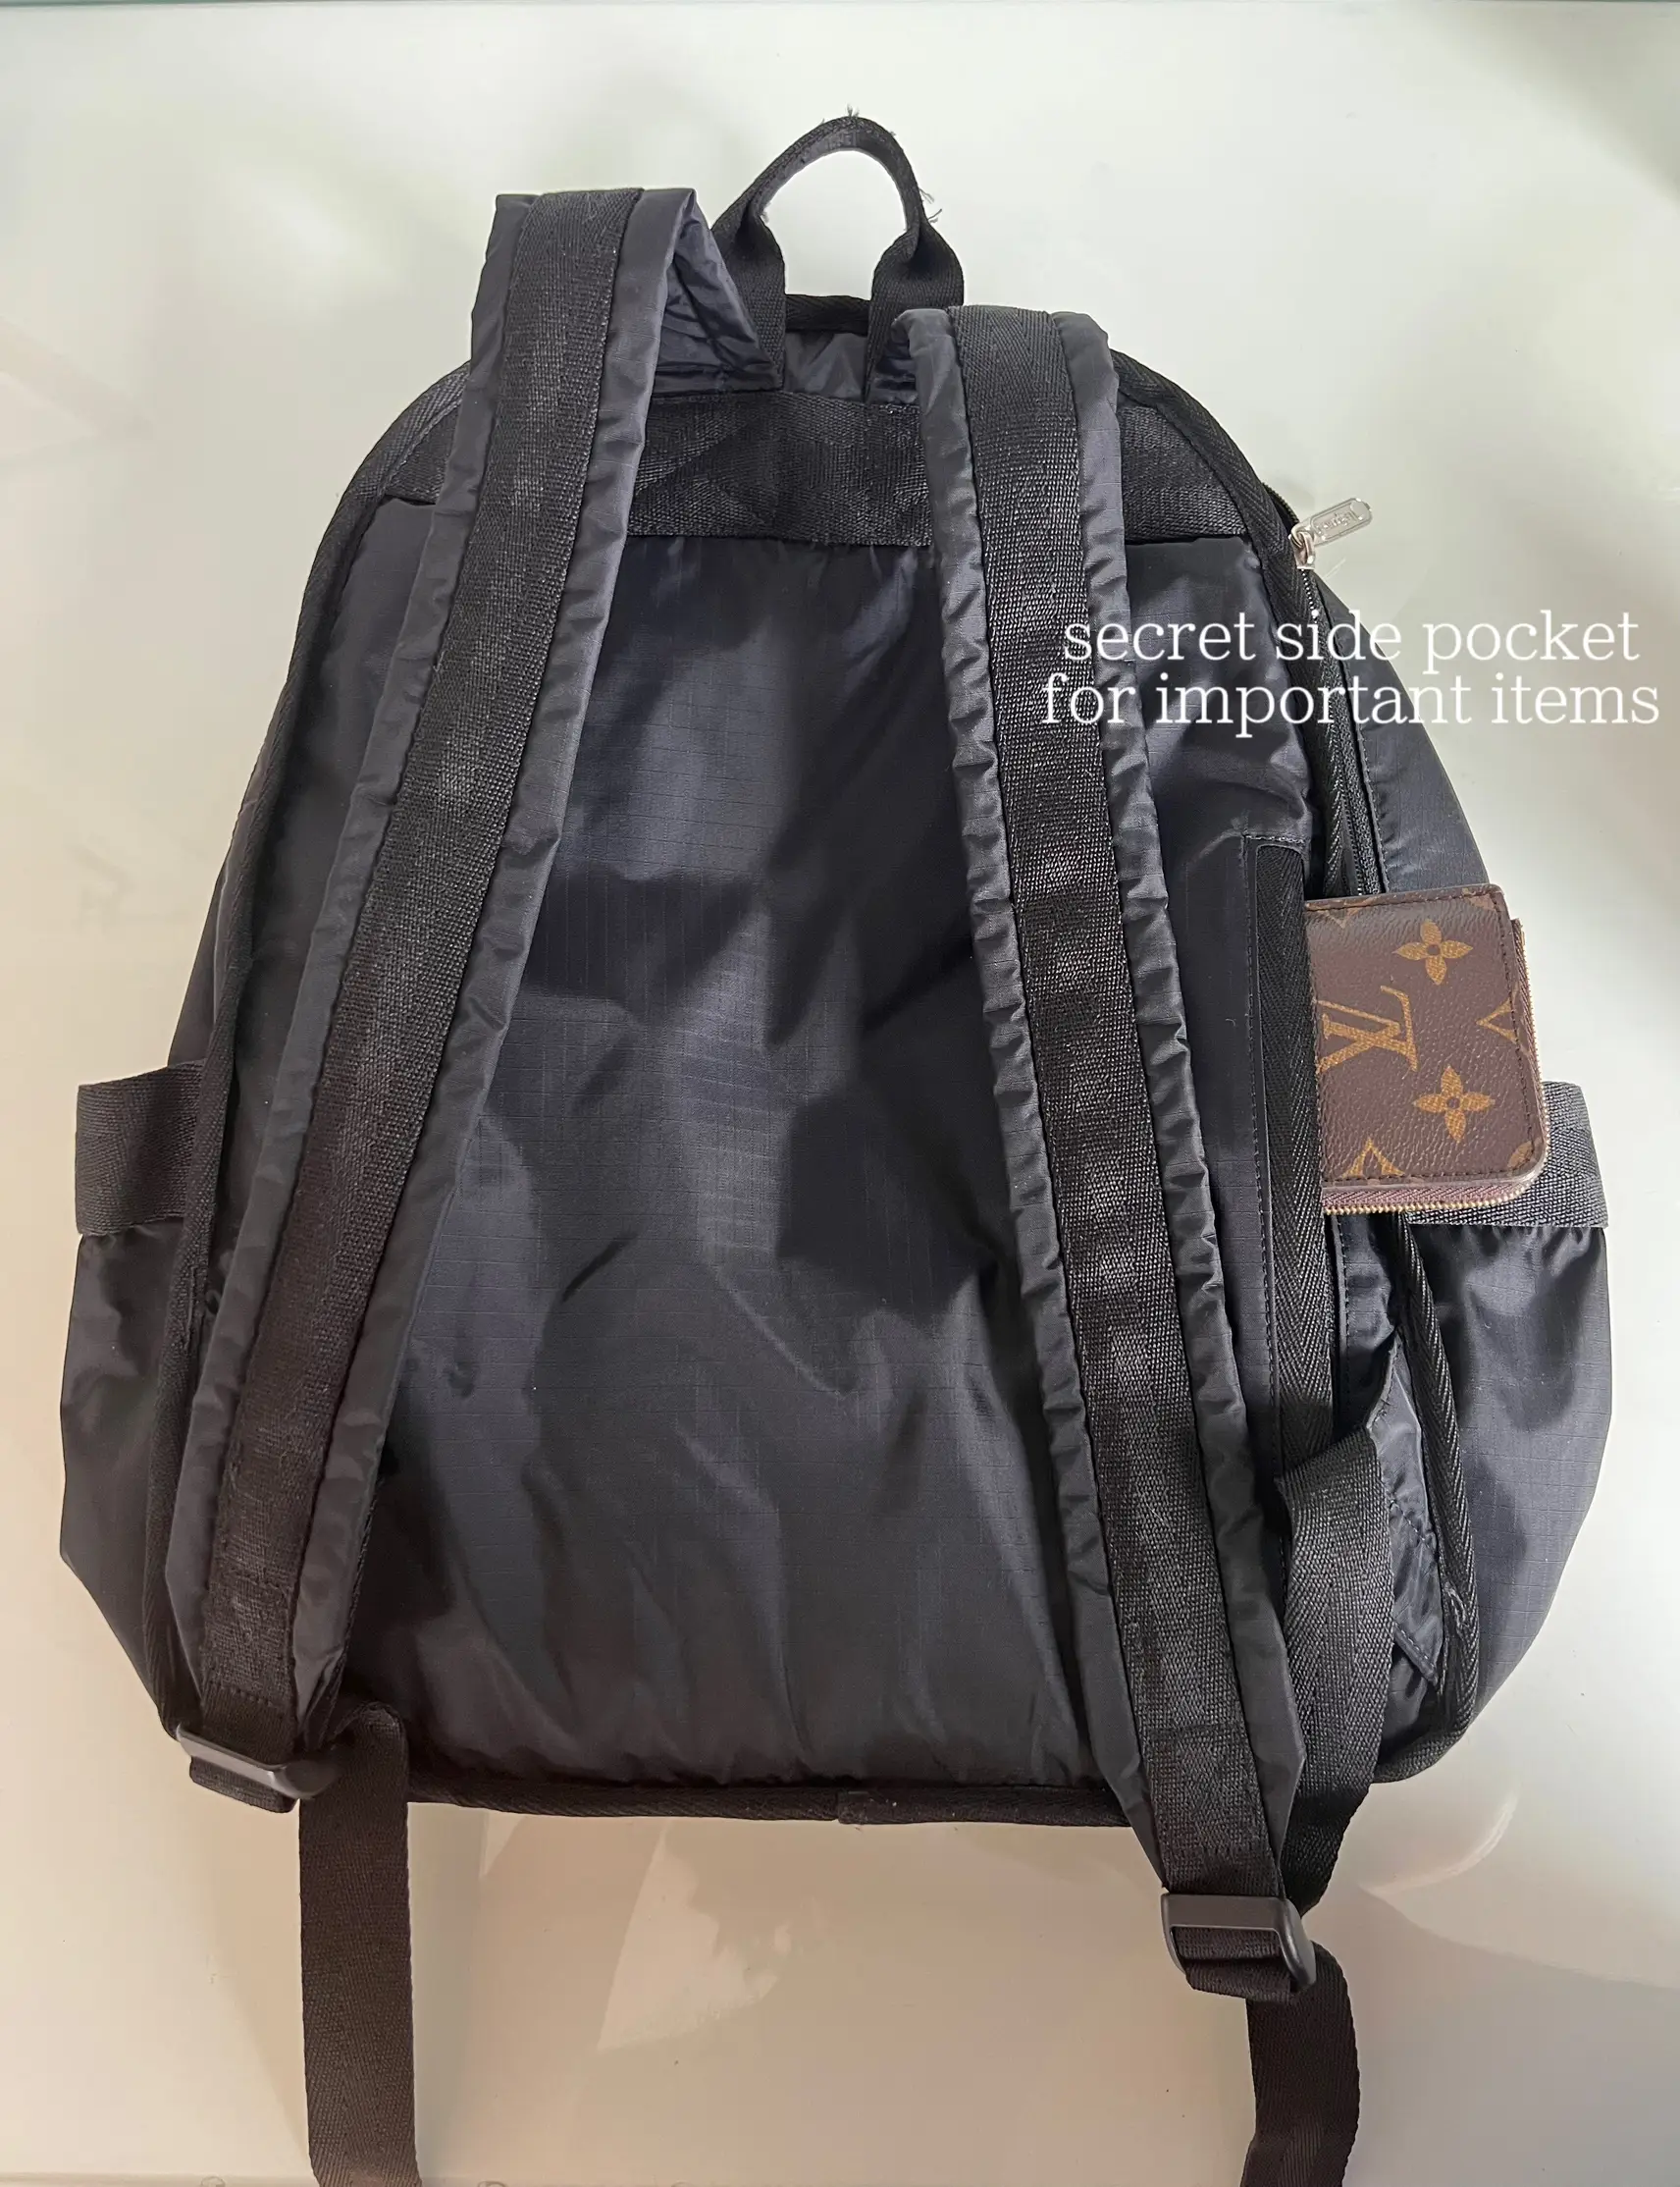 BOUJEE ON A BUDGET  LOUIS VUITTON PALM SPRINGS BACKPACK MINI